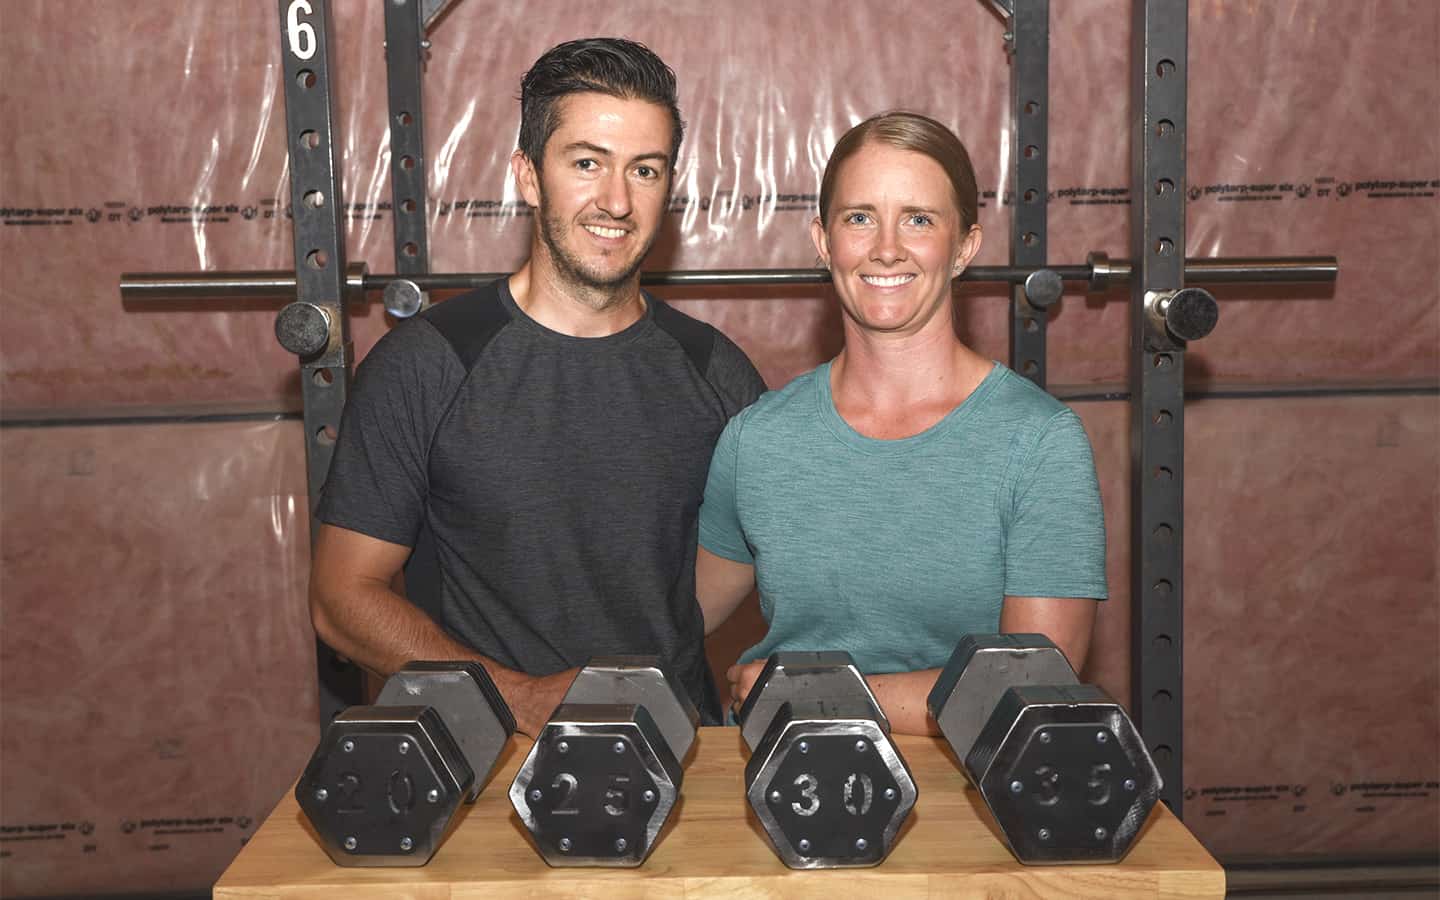 Local couple take DIY workout equipment to the next level